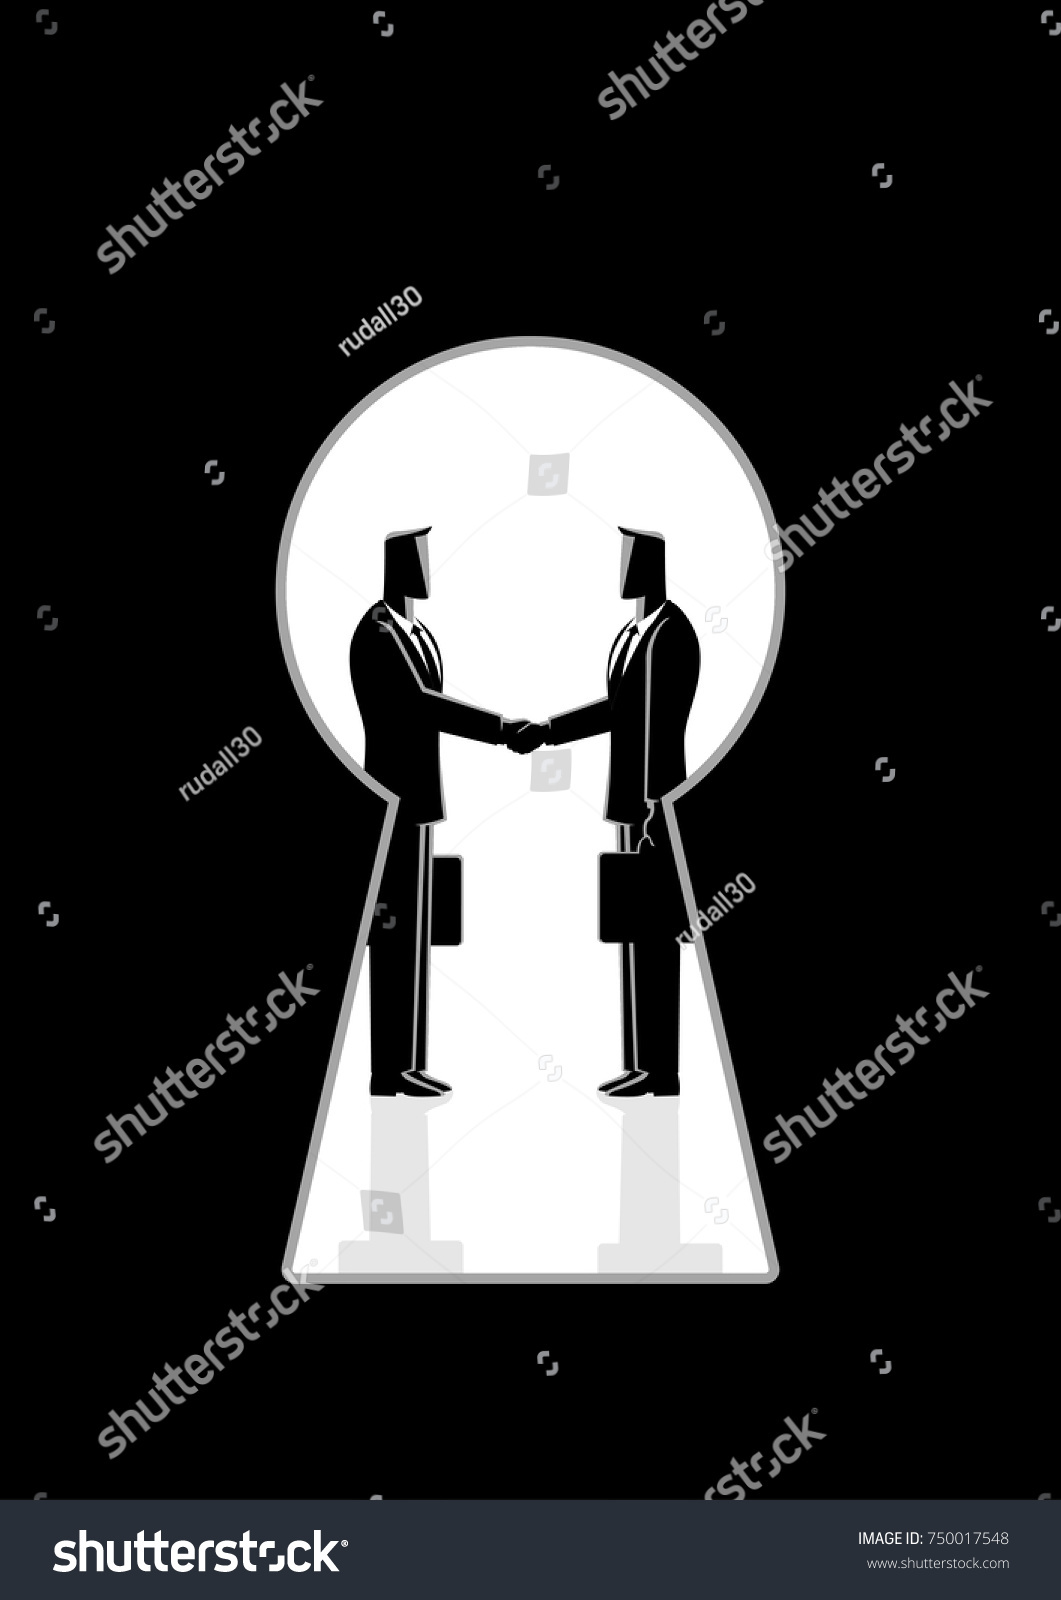 SVG of Business concept vector illustration of two businessmen shaking hands seen through a keyhole, business idiom for backroom deal svg